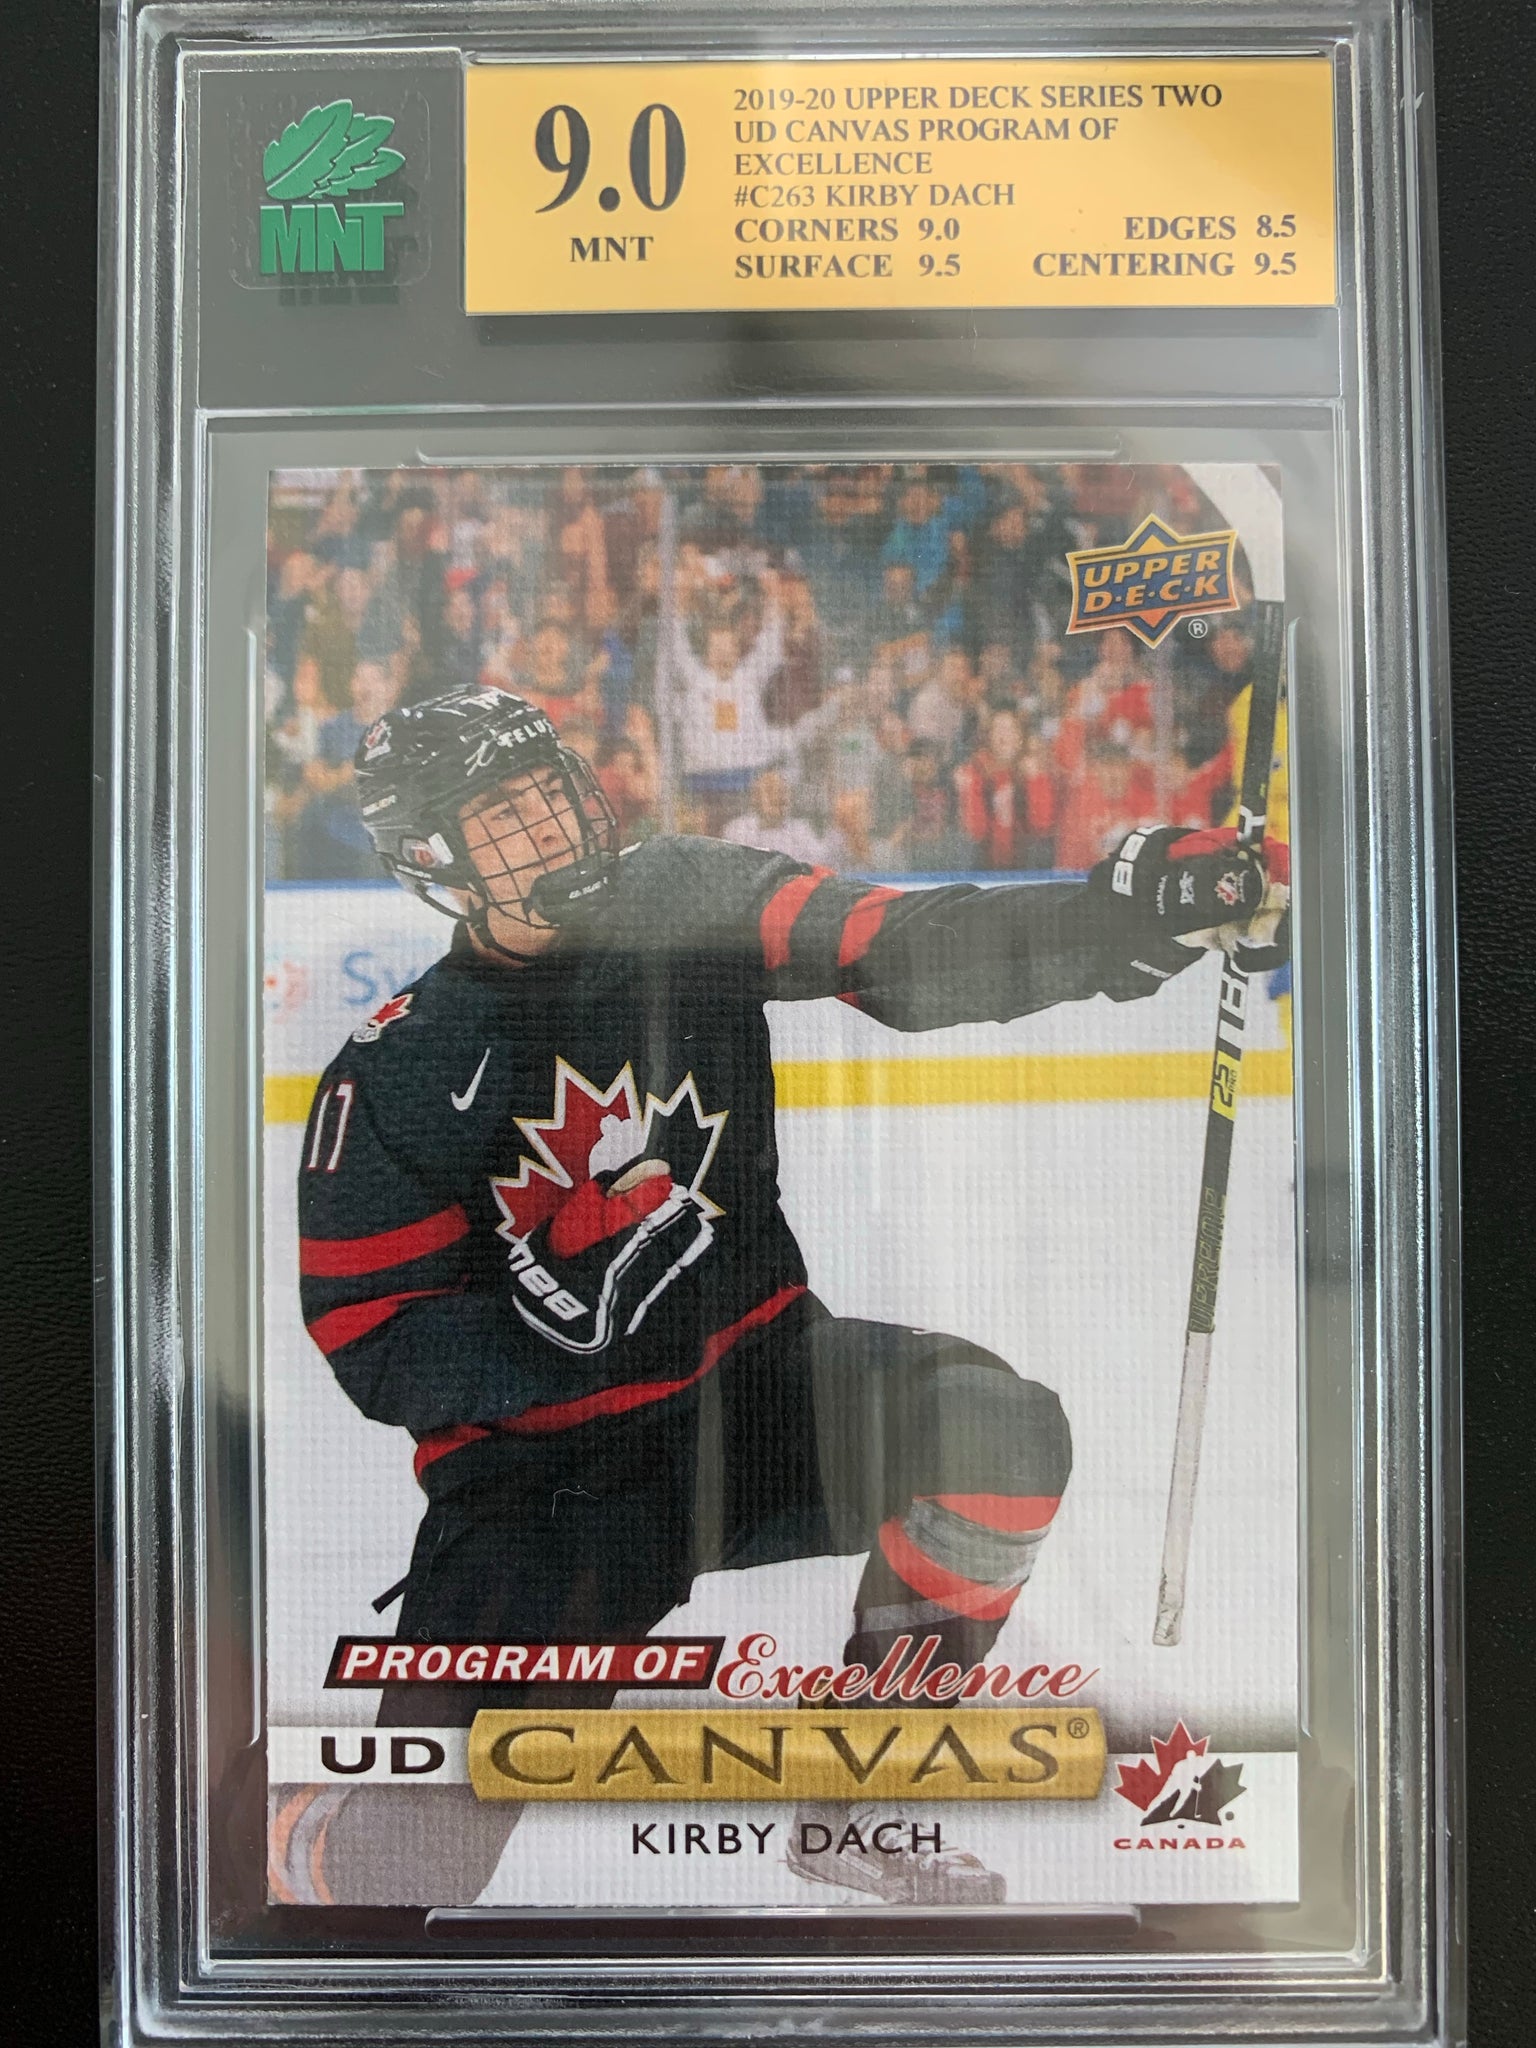 2019-20 UPPER DECK HOCKEY #C263 CHICAGO BLACKHAWKS - KIRBY DACH CANVAS PROGRAM OF EXCELLENCE ROOKIE CARD GRADED MNT 9.0 MINT